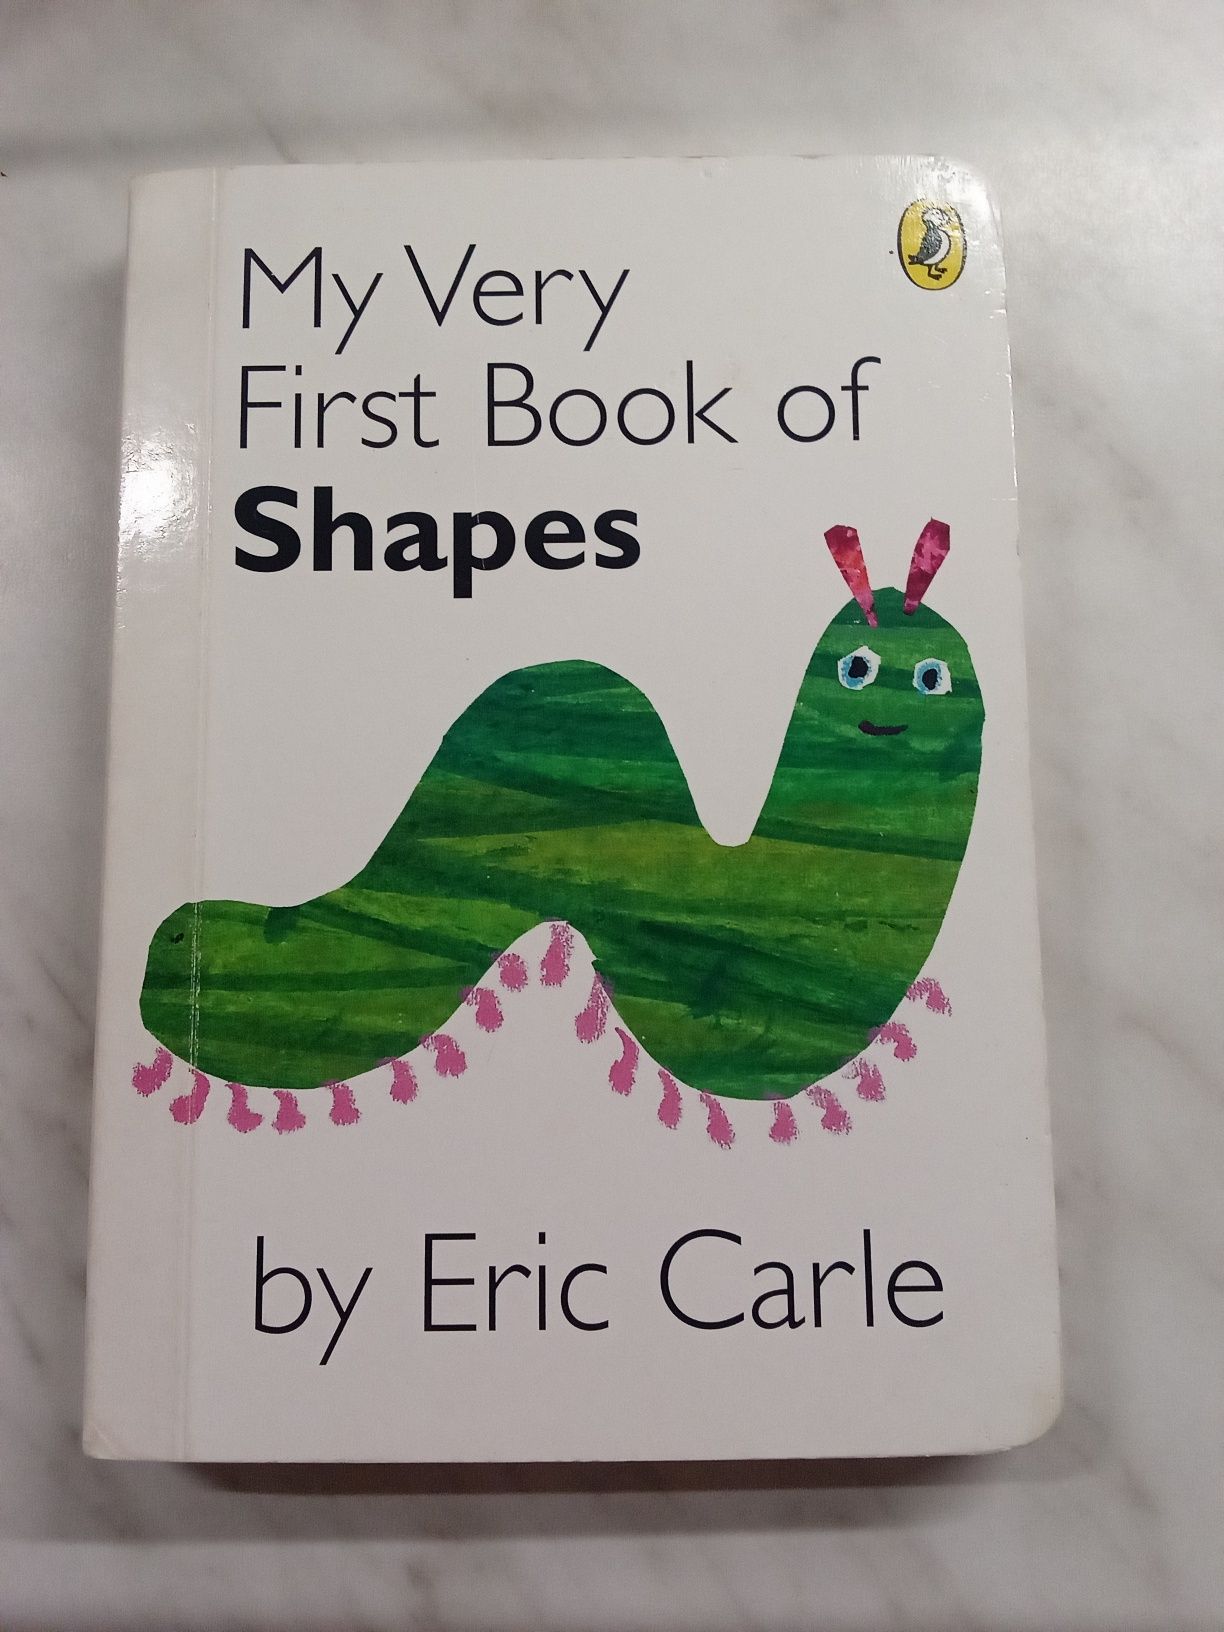 My very first book of shapes- Eric Carle